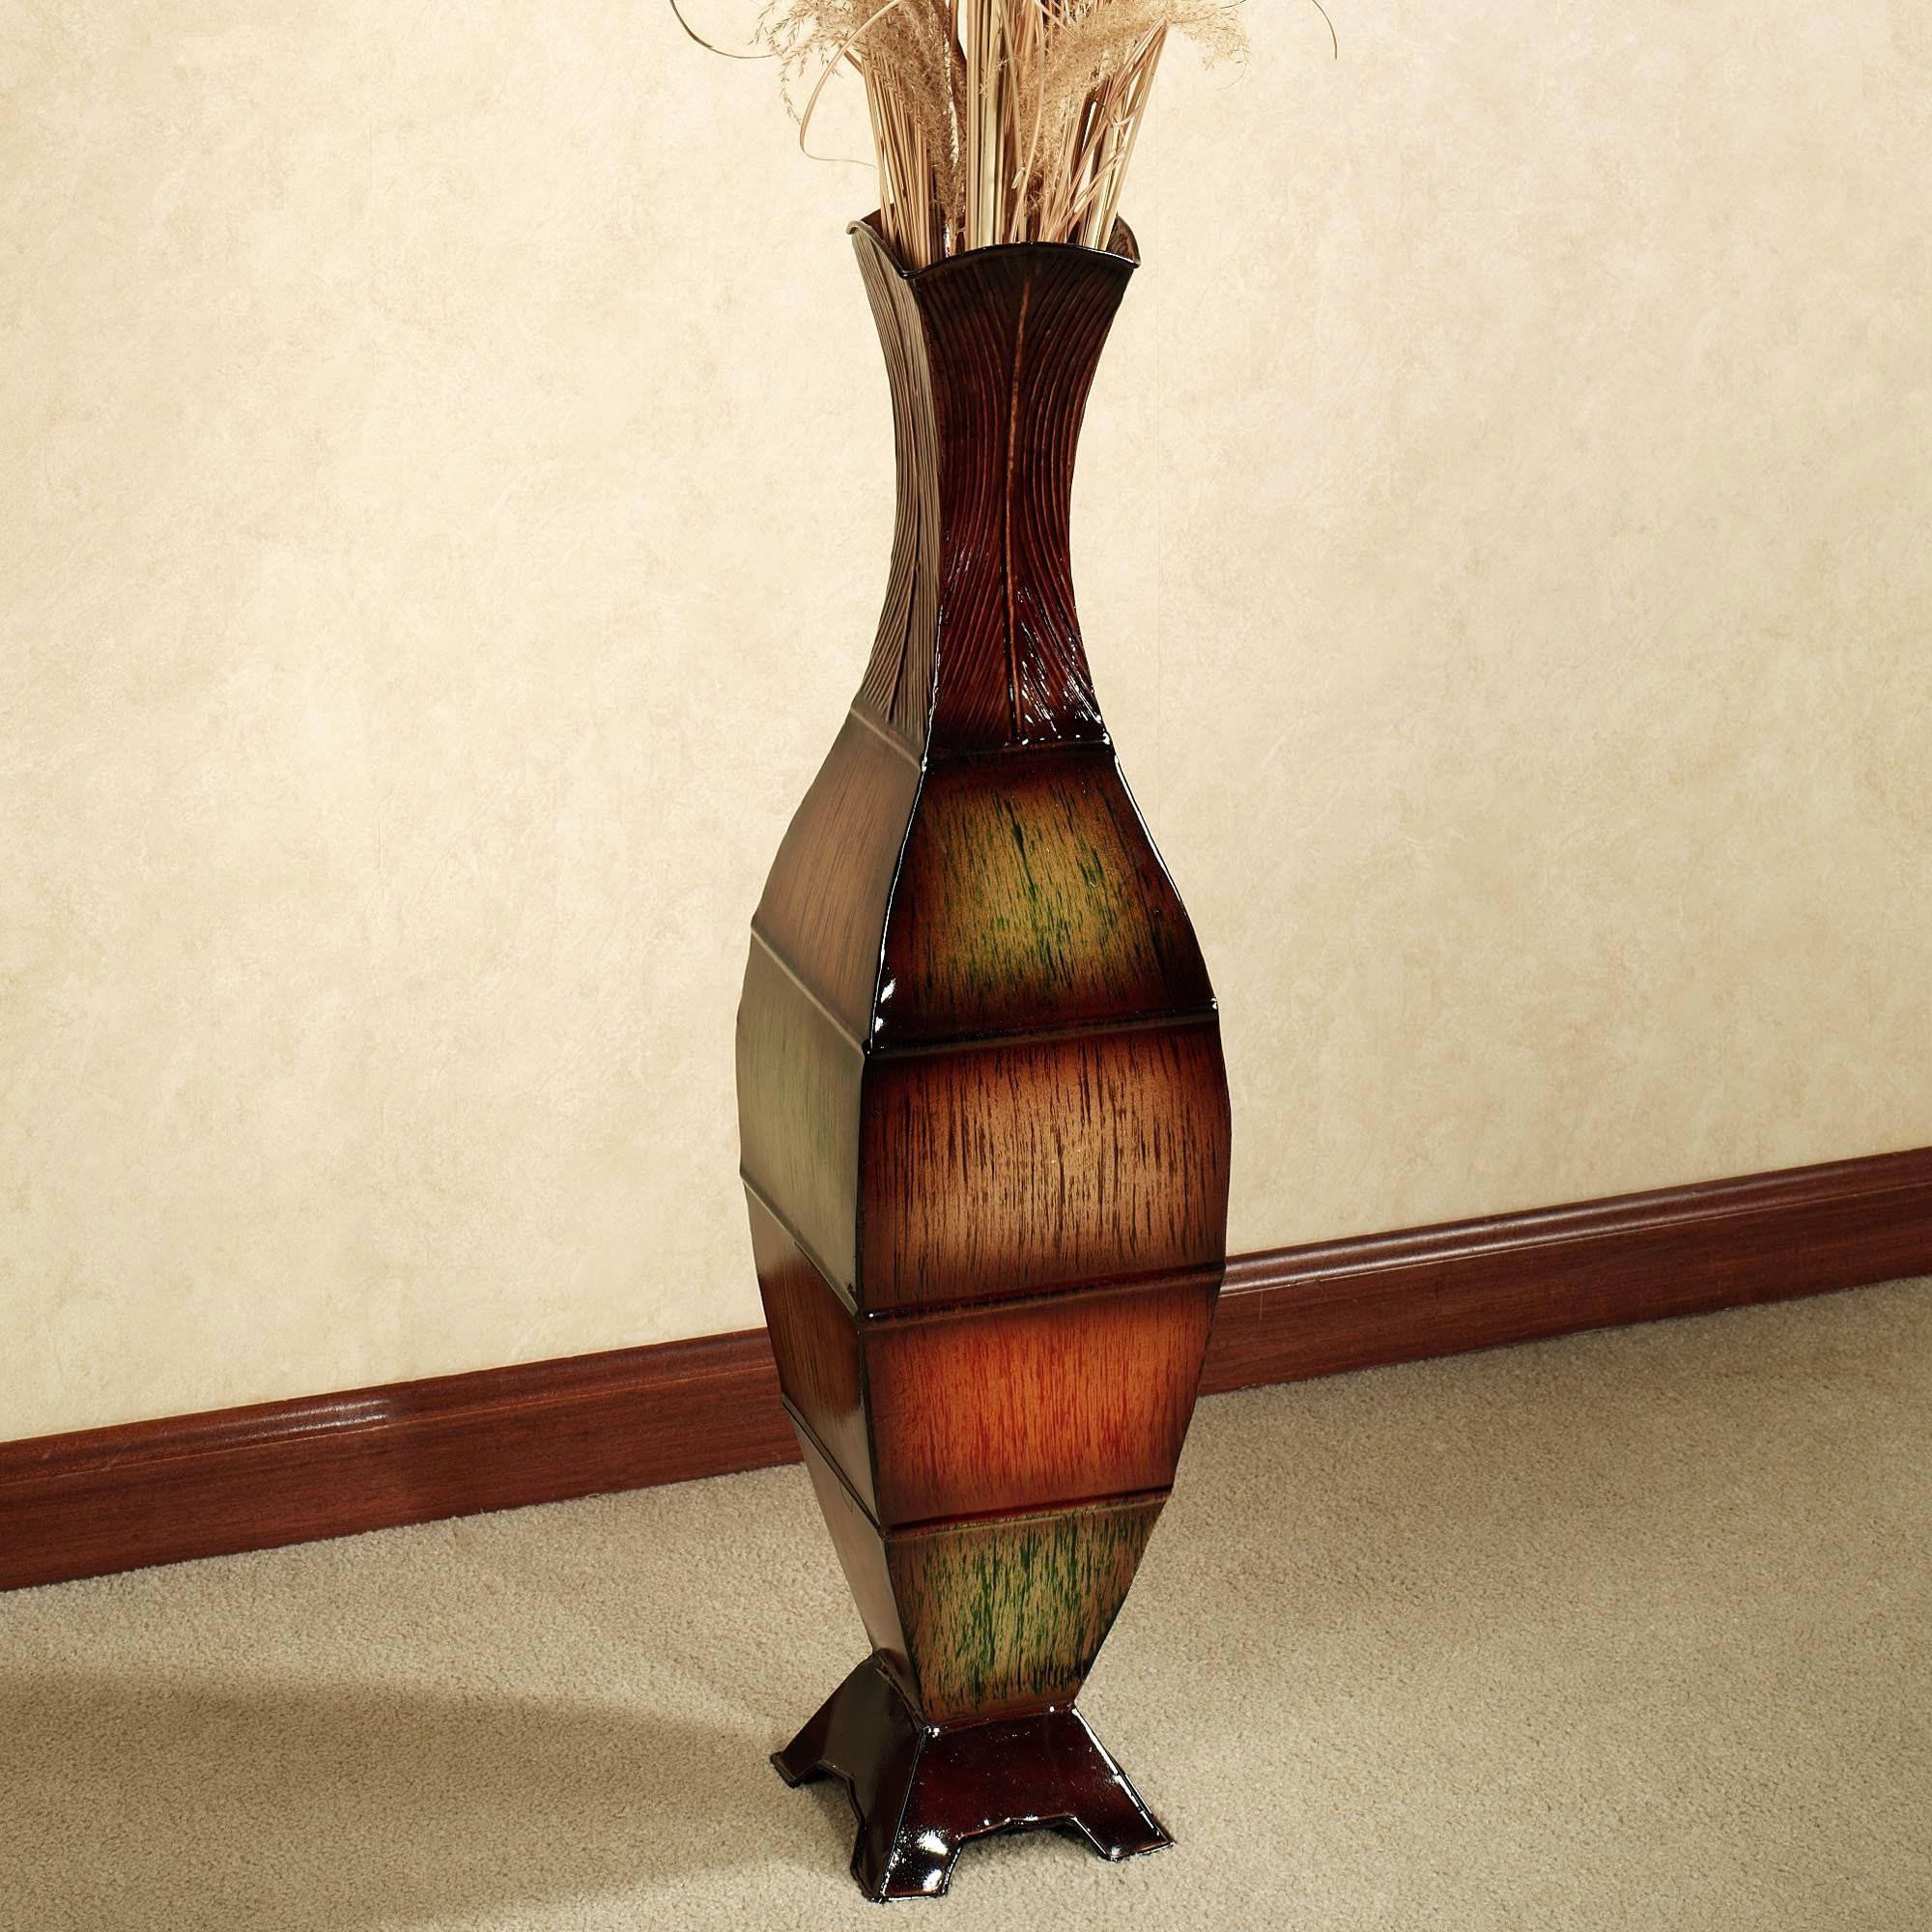 20 Famous Tall Unique Vases 2024 free download tall unique vases of living room vases wholesale new h vases big tall i 0d for cheap also regarding living room vases wholesale new h vases big tall i 0d for cheap also design of